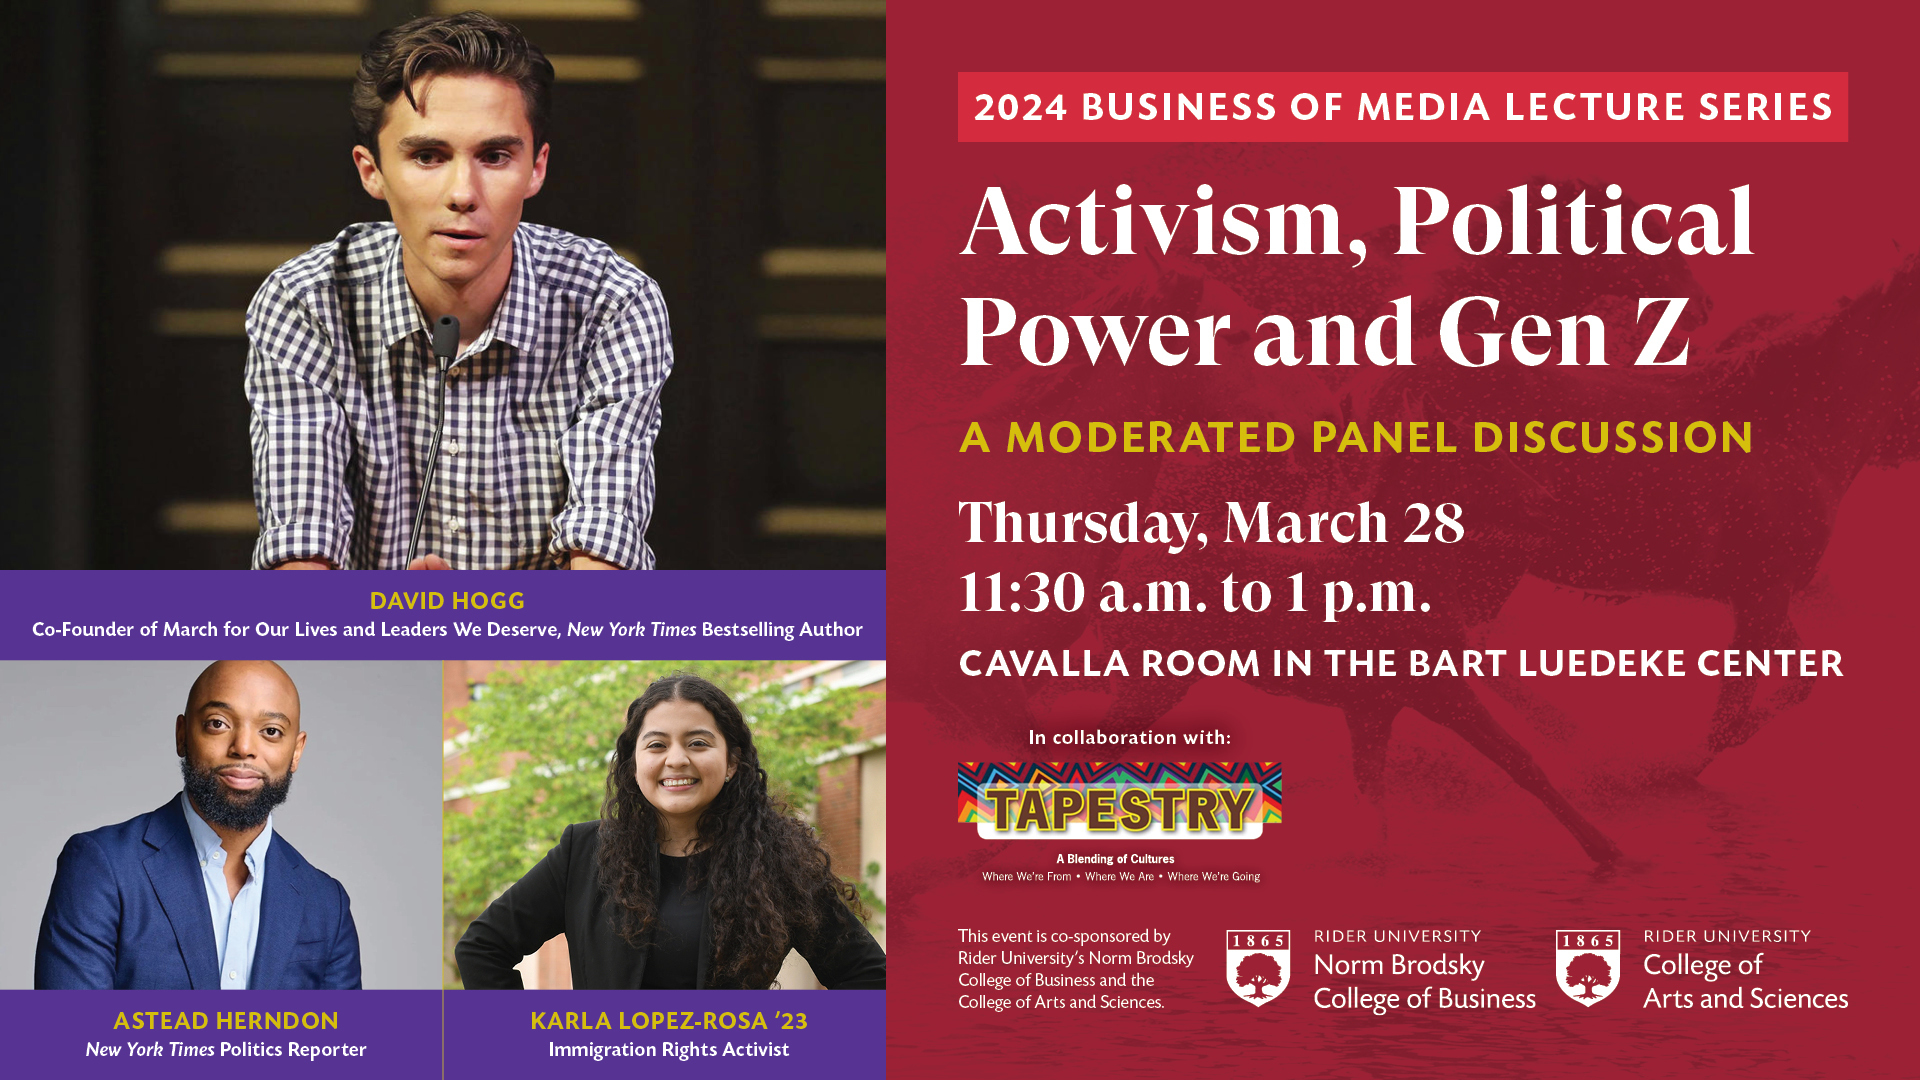 Event graphic: 2024 Business of Media Lecture Series: Activism, Political Power and Gen Z/ A moderated panel discussion